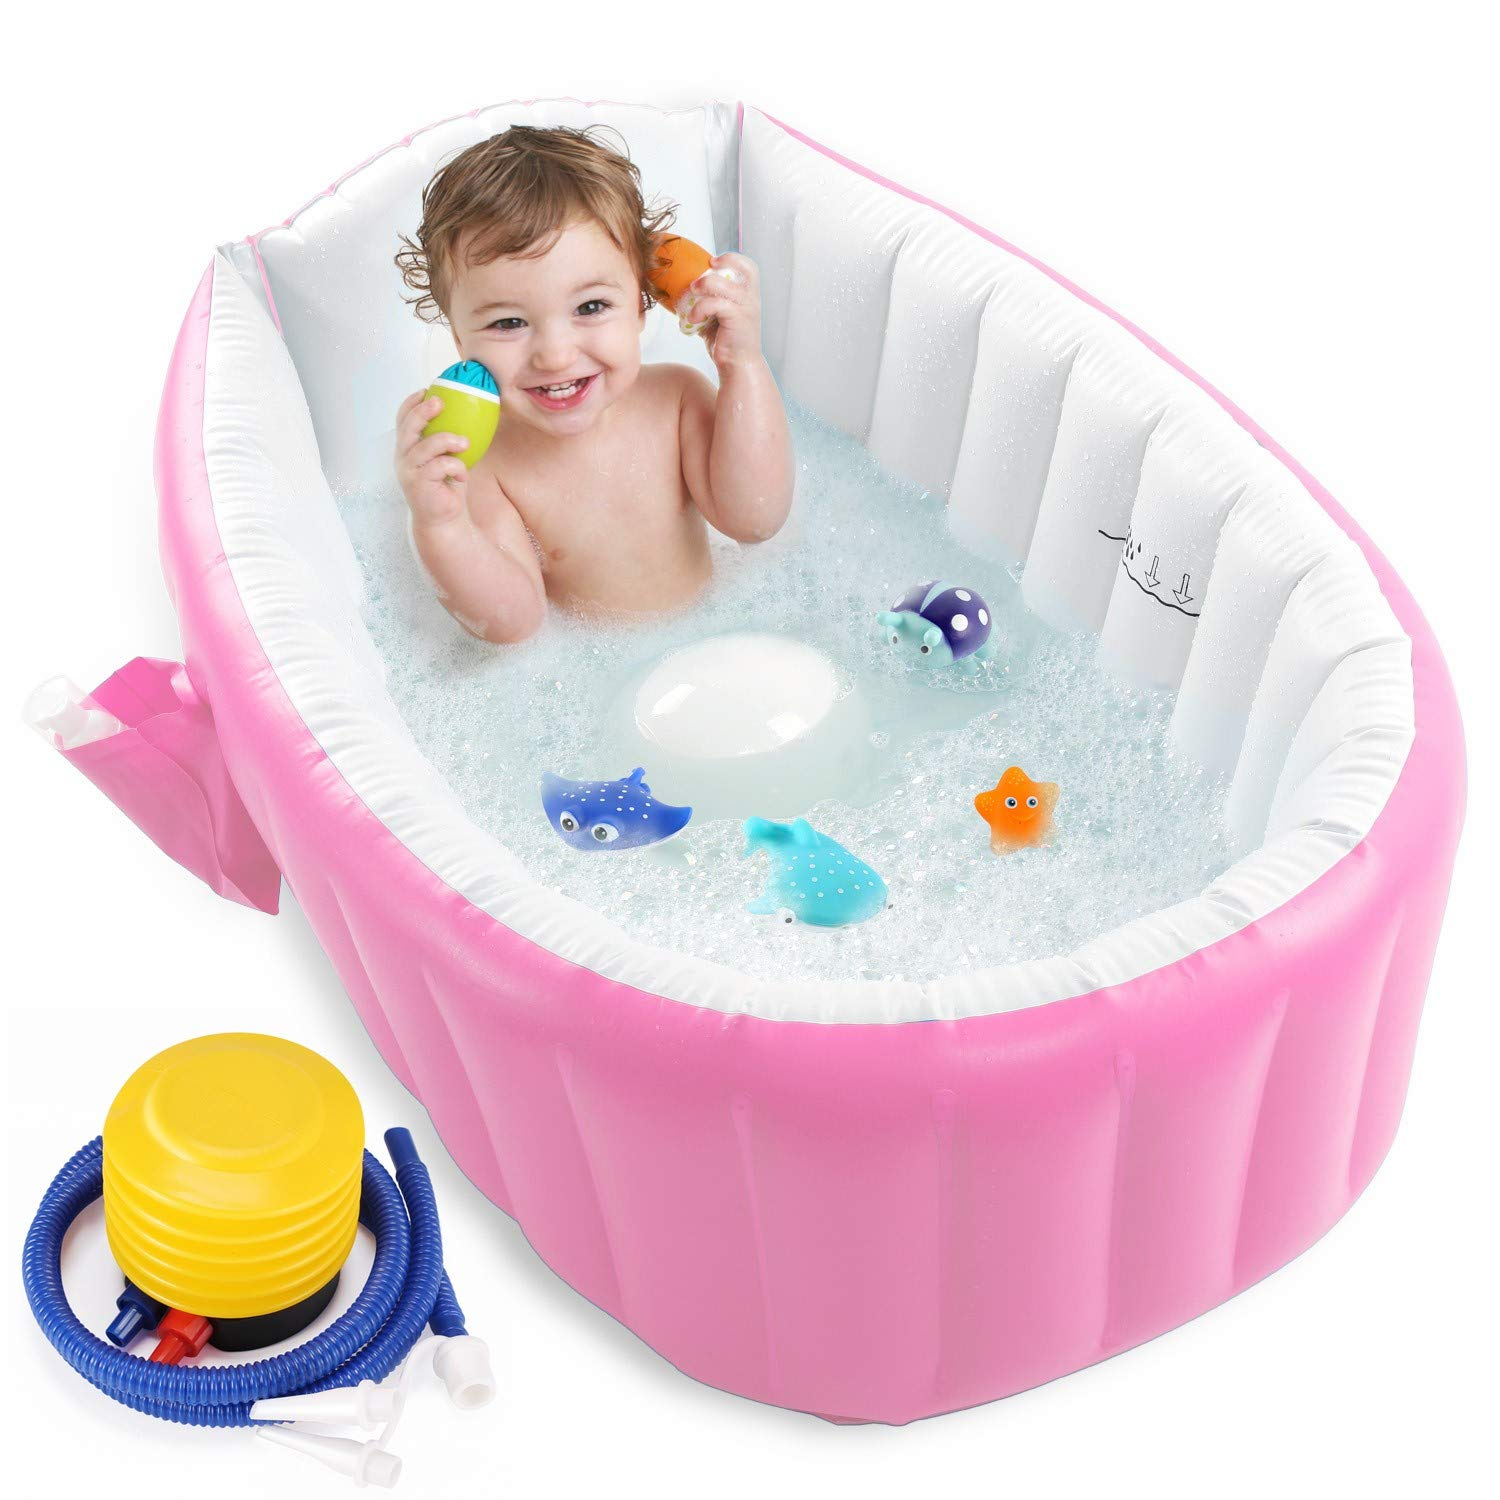 Inflatable bath pool for children